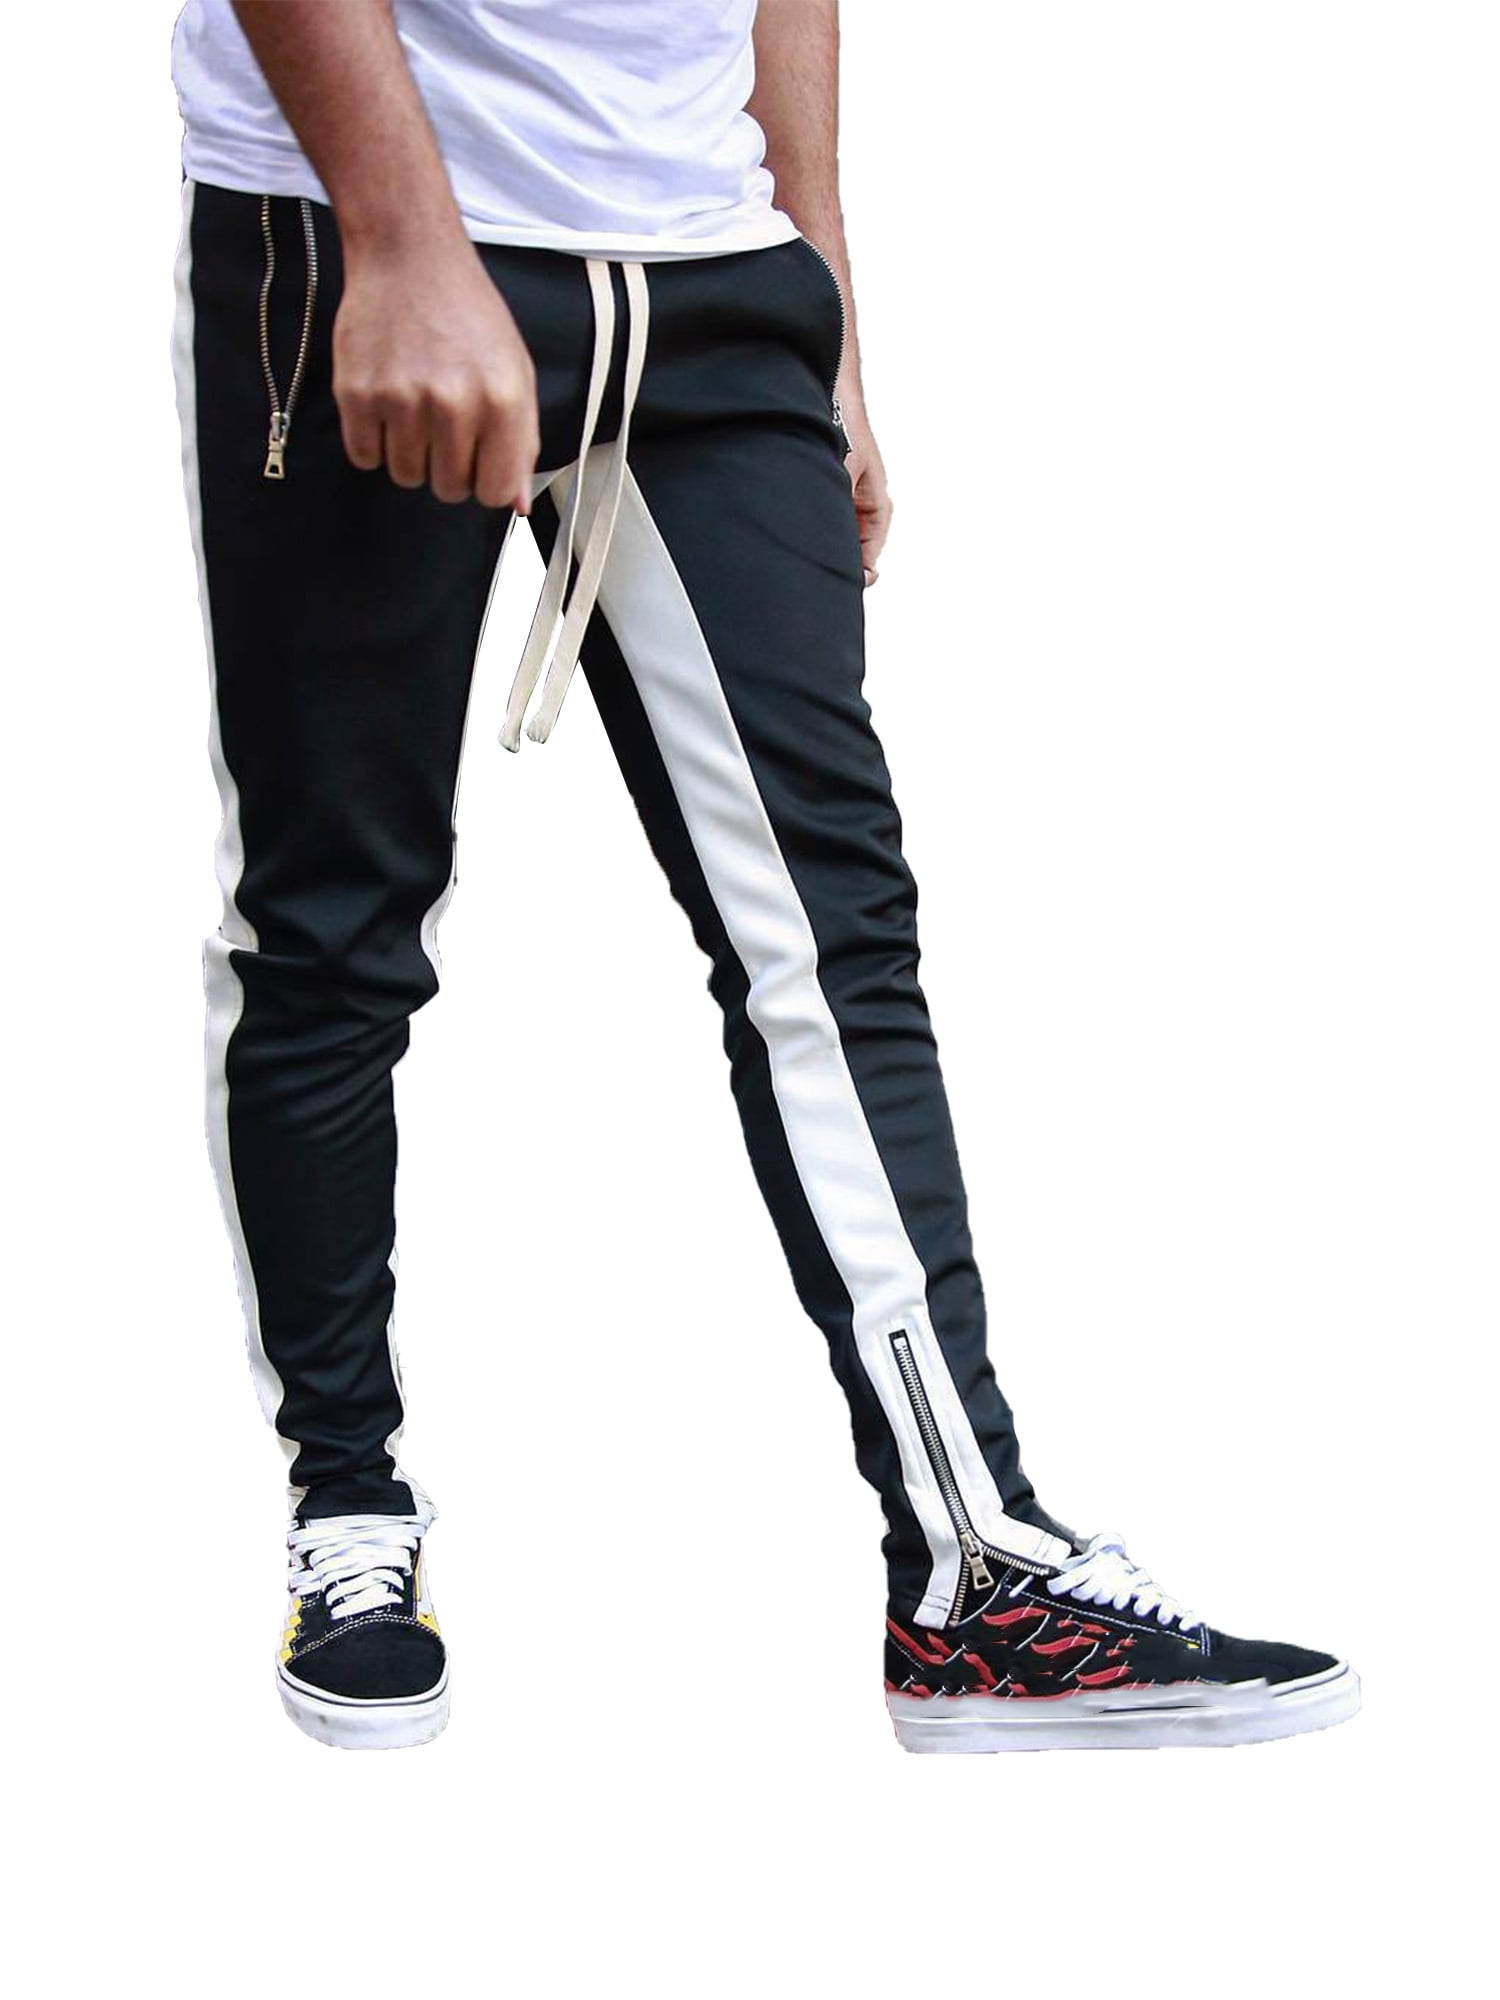 Mens Casual Sweatpants Trousers Bottoms Casual Running Sports Elasticated Pants 